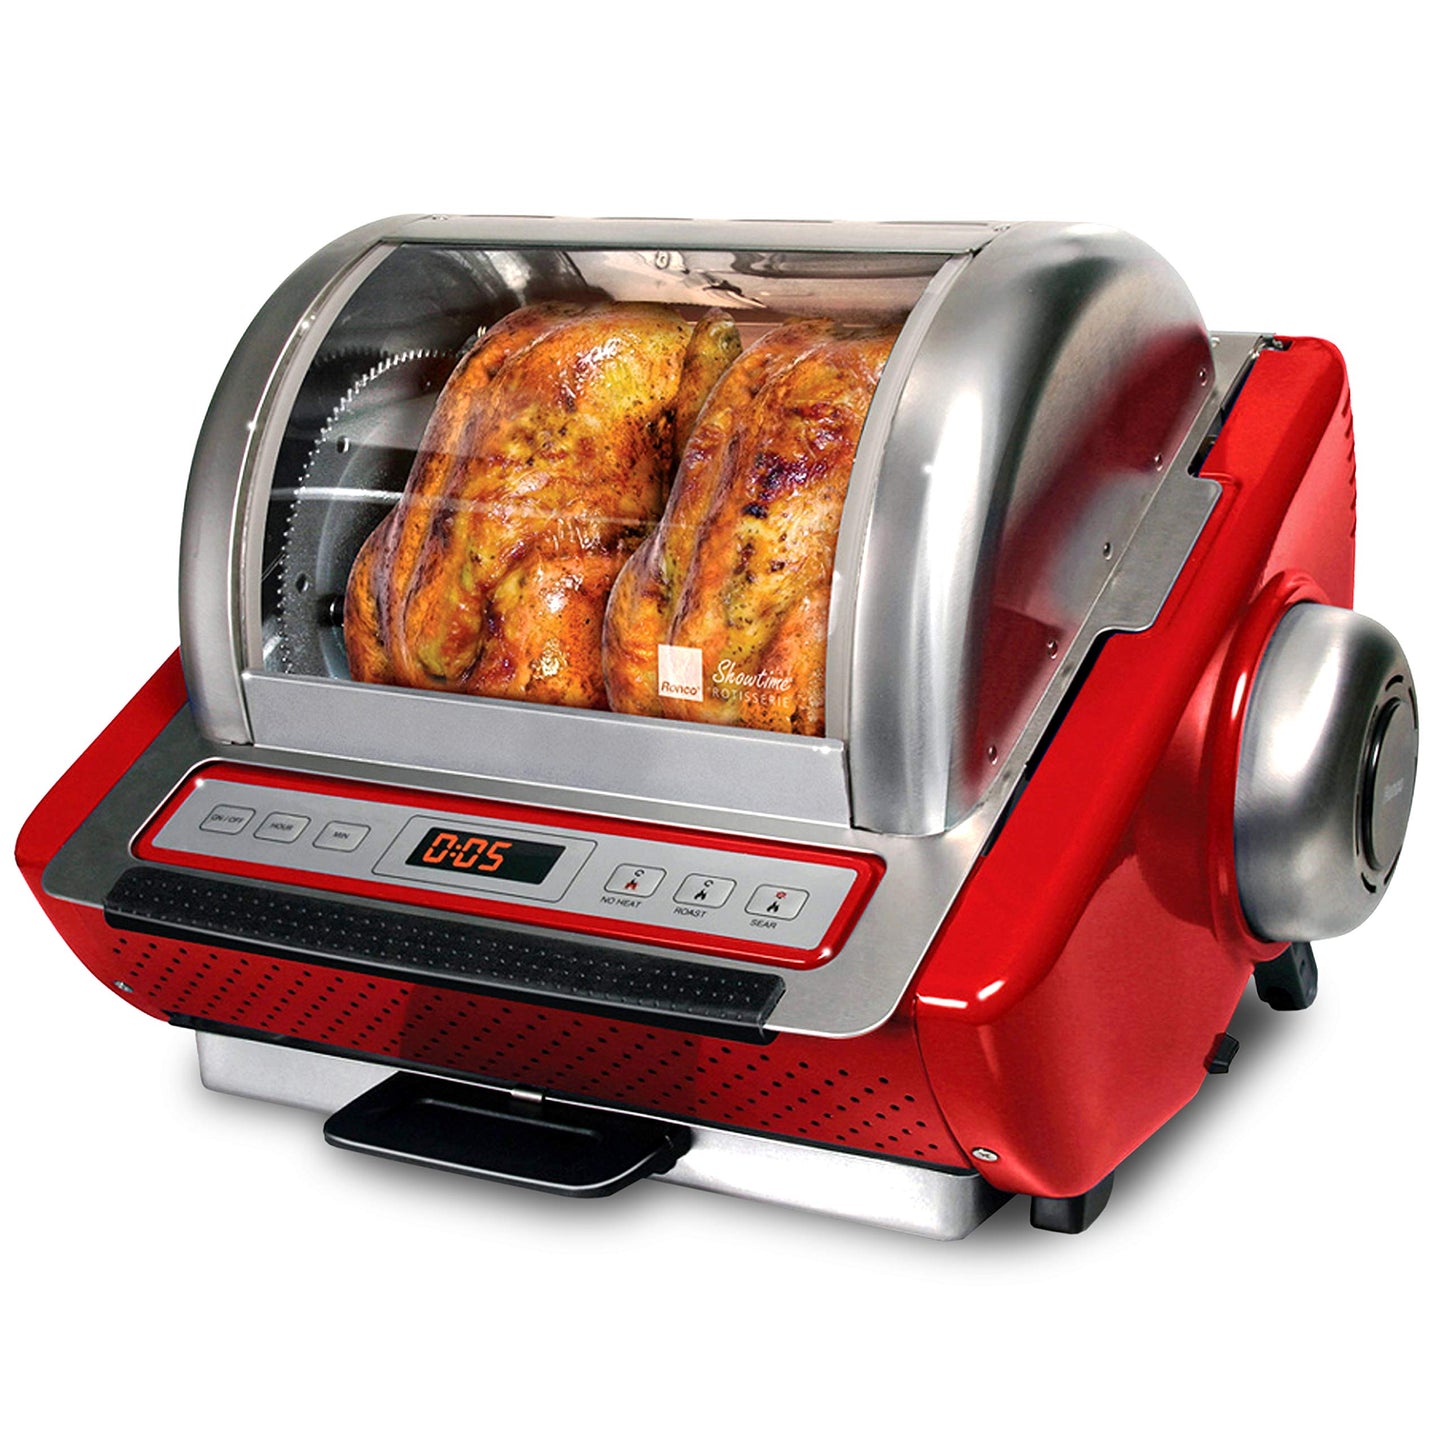 Ronco Showtime EZ-Store Large Capacity Rotisserie & BBQ Oven, Digital Controls, Compact Storage, Perfect Preset Rotation Speed, Self-Basting, Auto Shutoff, Includes Multipurpose Basket, red